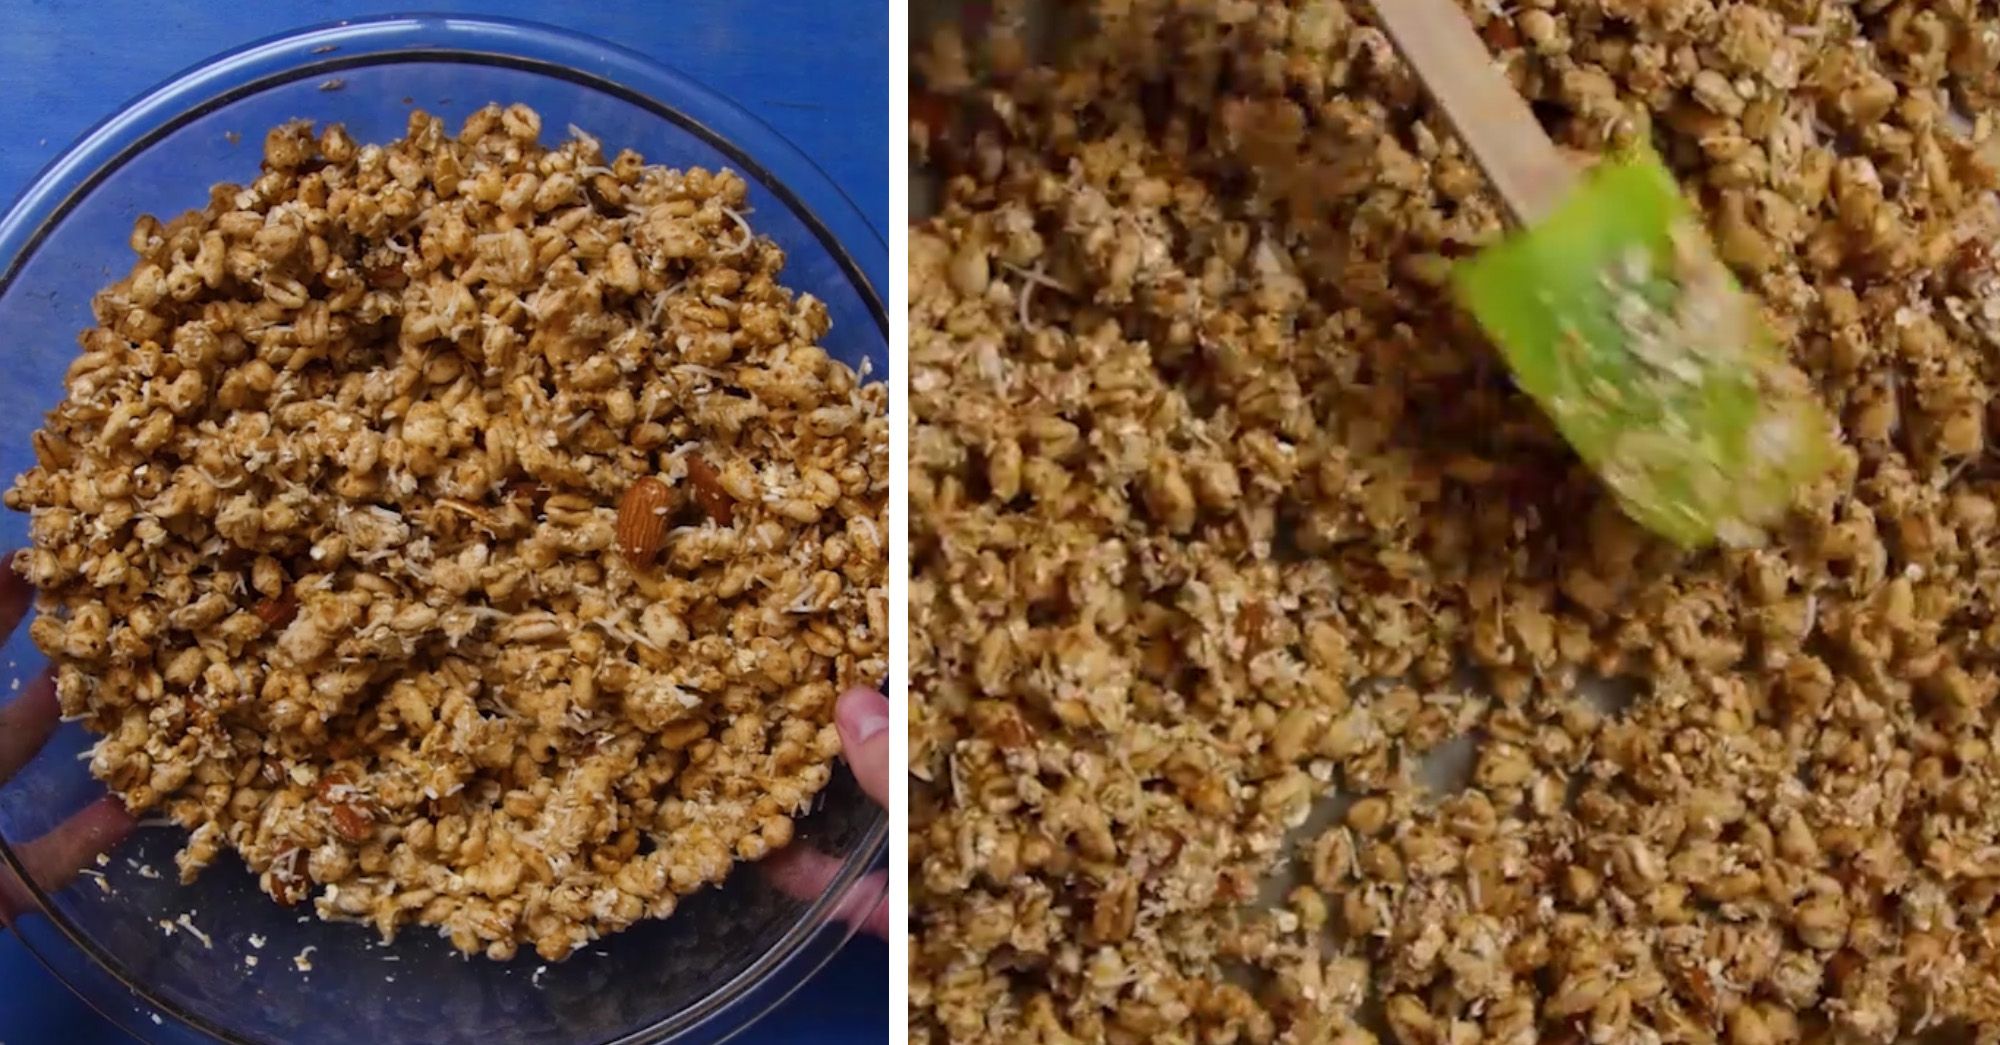 uncooked granola being spread on a pan